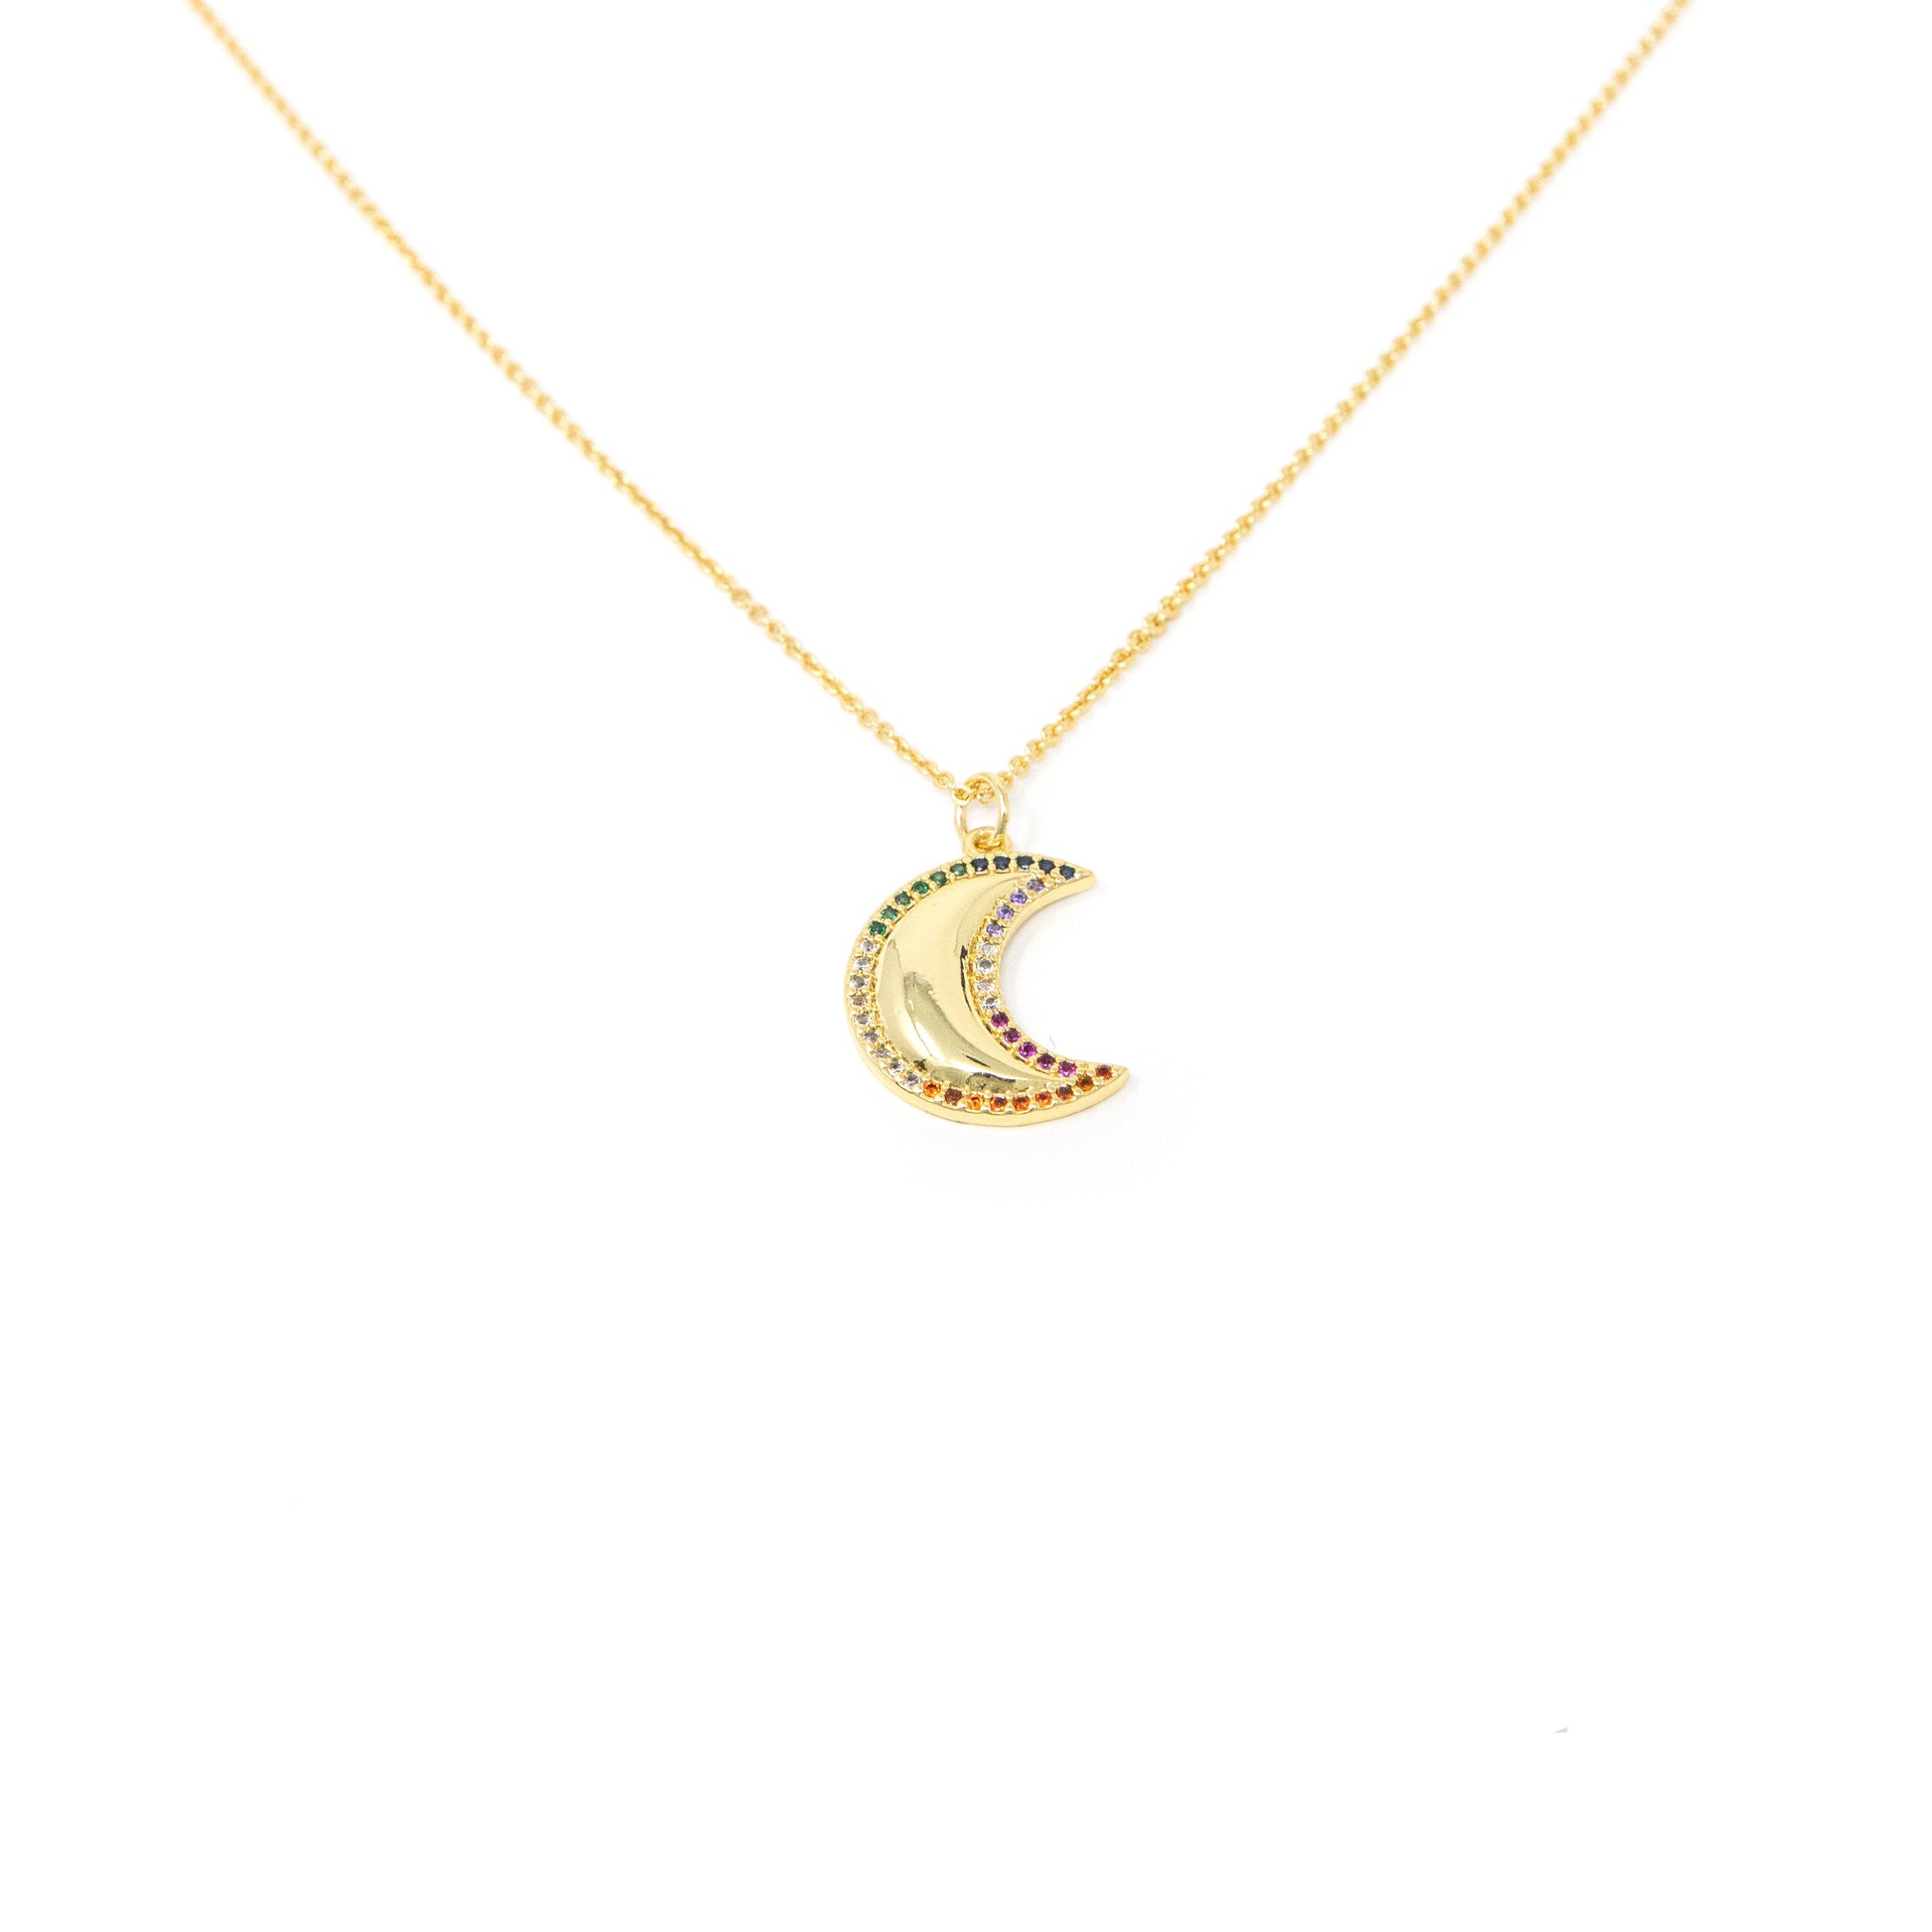 Rainbow and Gold Crescent Necklace JEWELRY The Sis Kiss